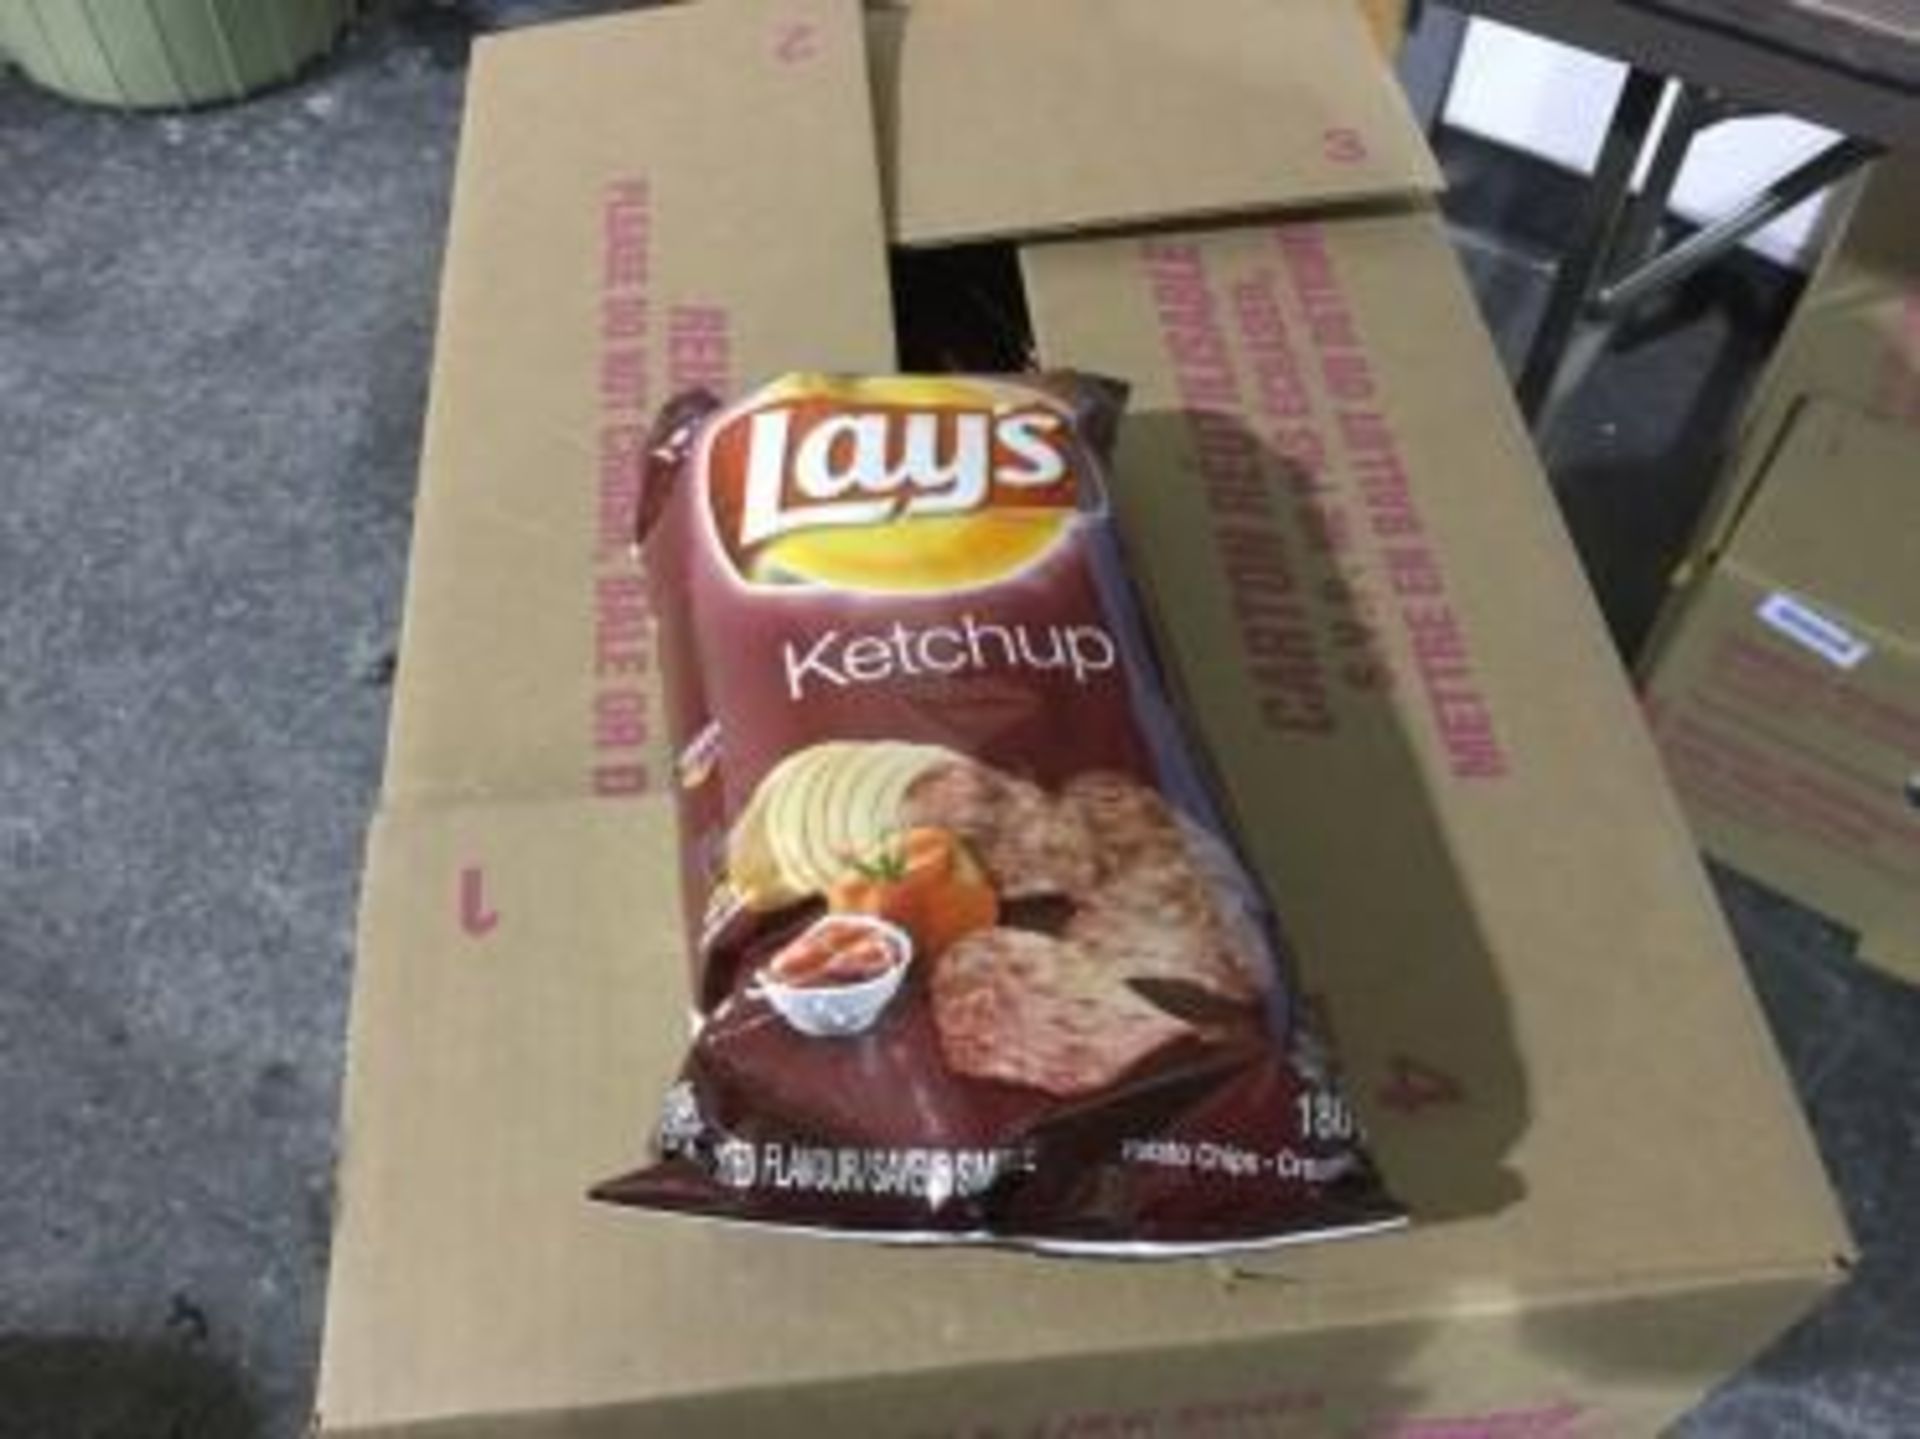 Case of 18 x 180 g Lay's Ketchup Chips